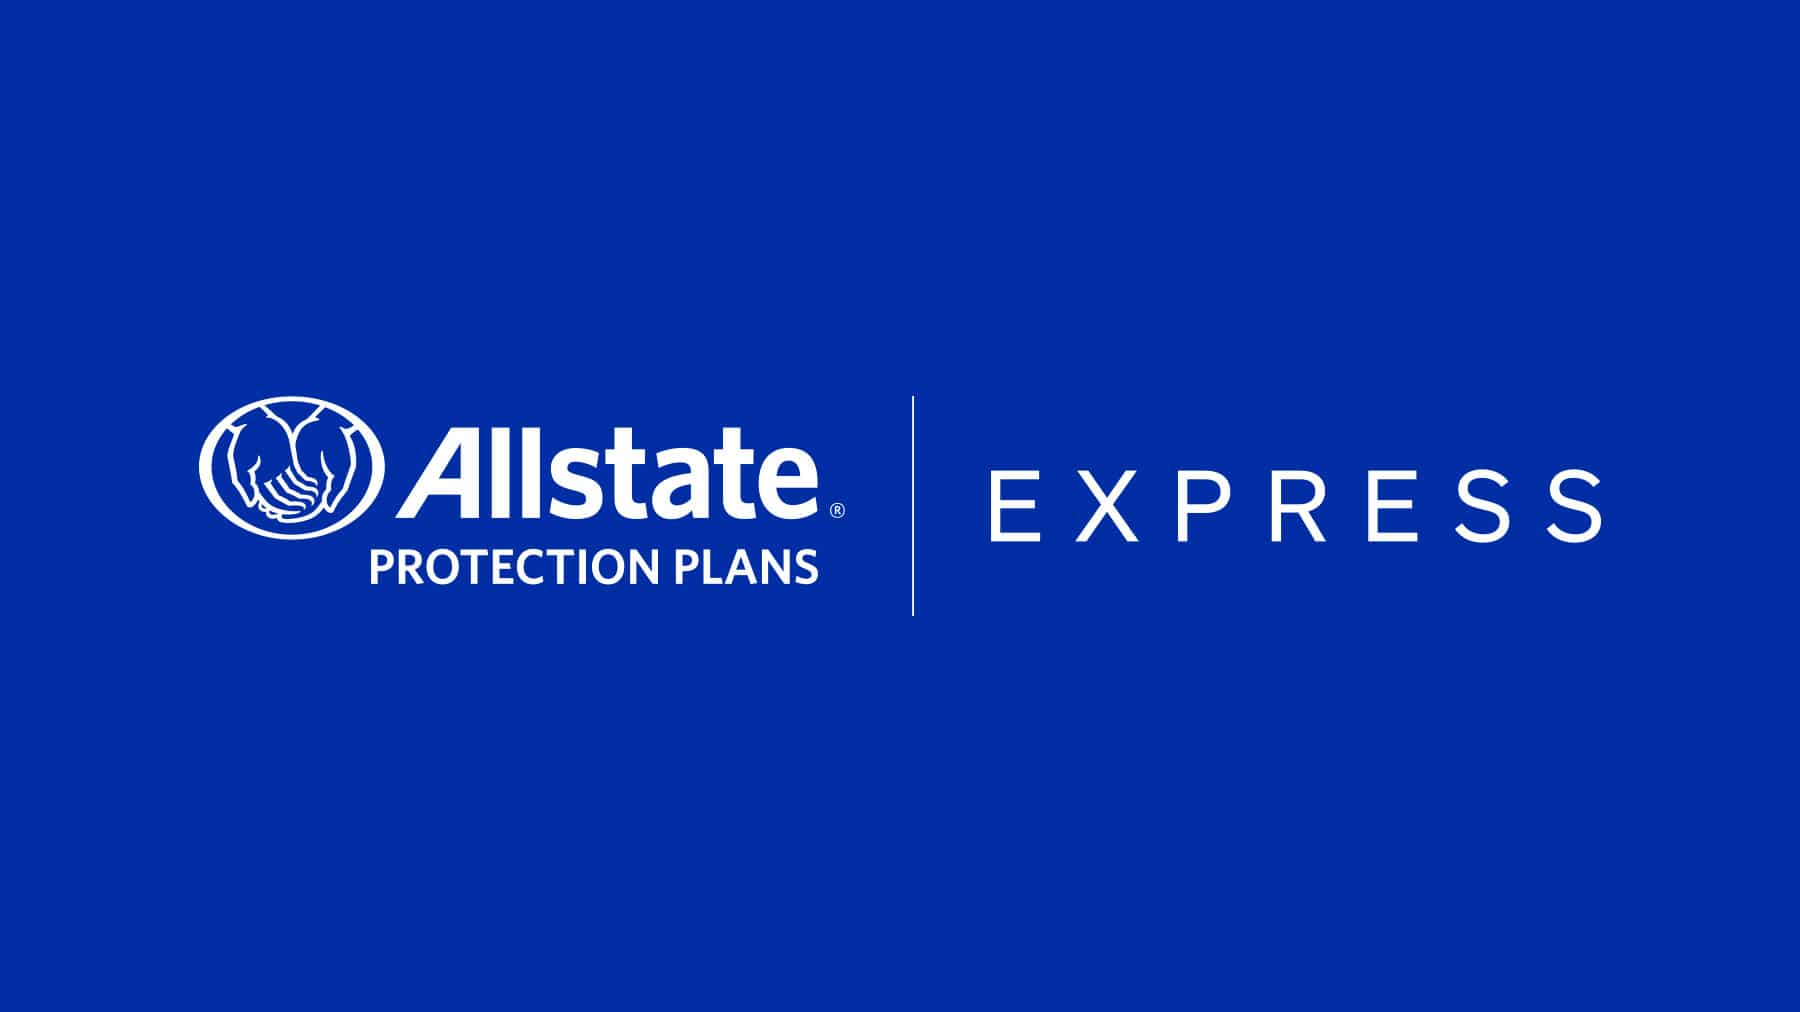 Meet Allstate Protection Plans Express